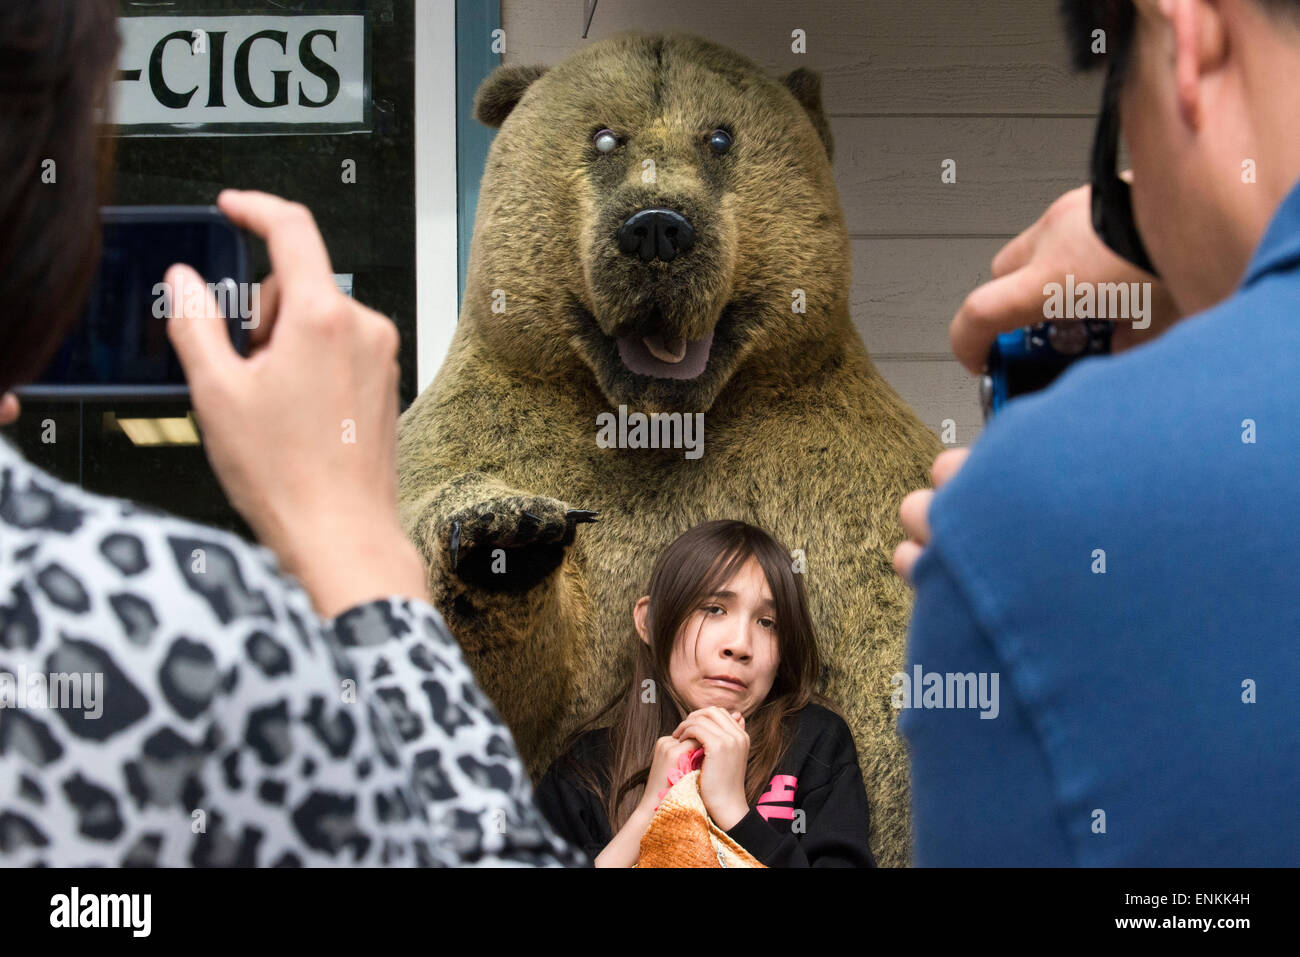 Shops in Downtown. Fear. Asian tourists photographing her daughter next to a stuffed bear. S Franklin street. Alaska Shirt Compa Stock Photo